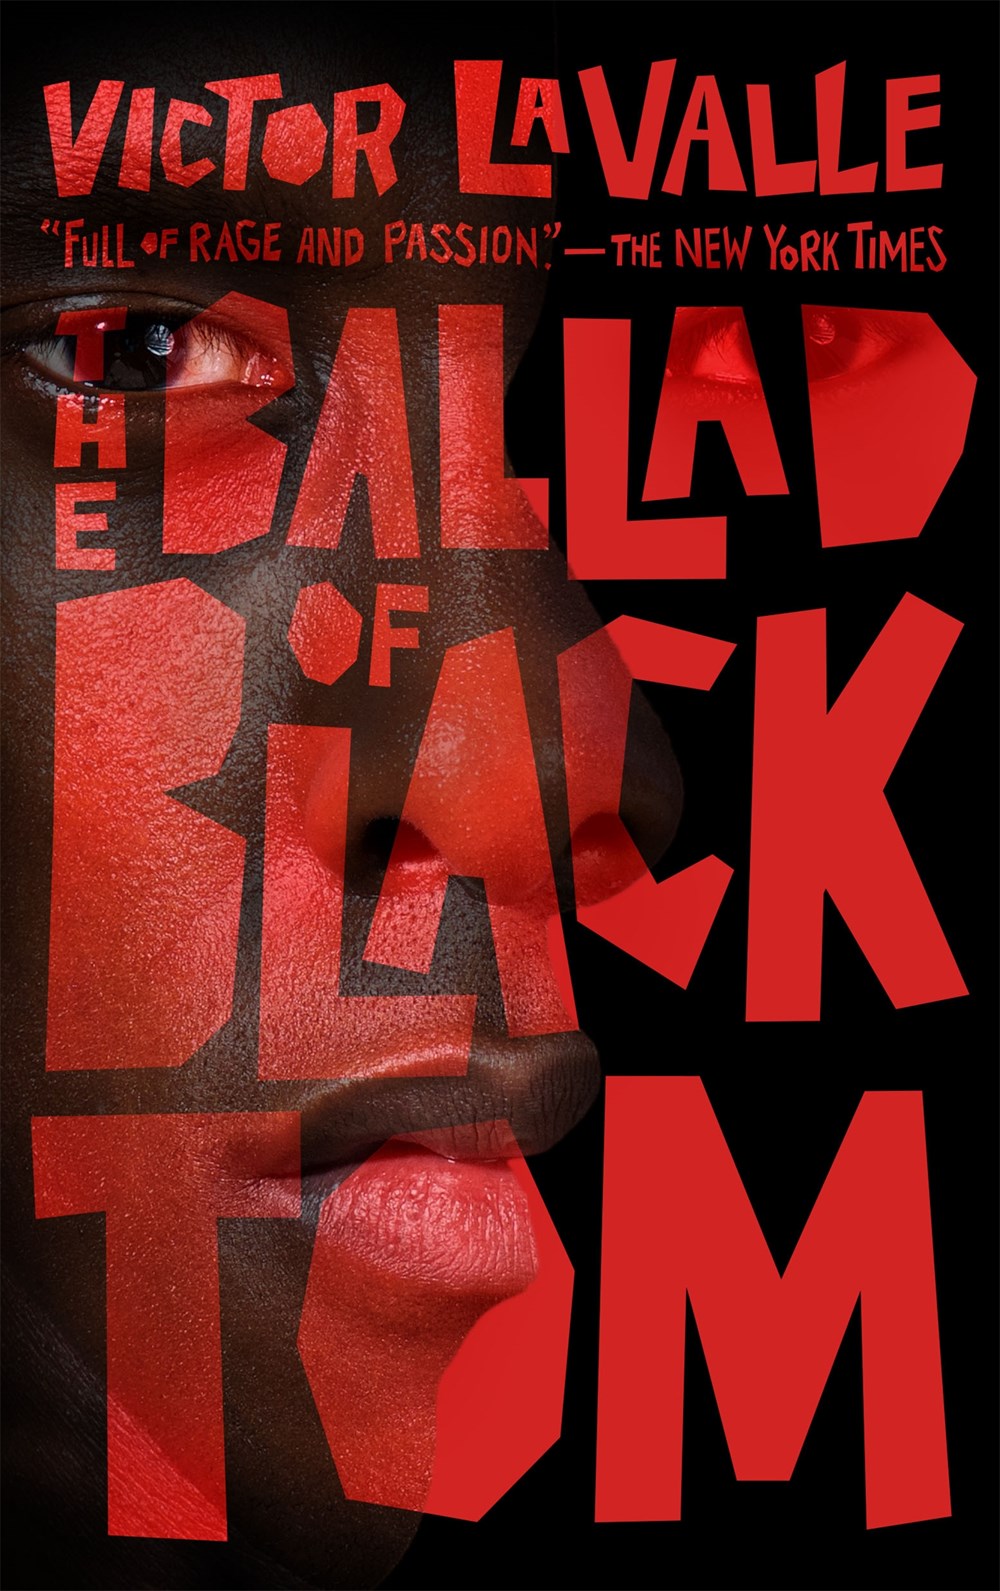 The Ballad of Black Tom by Victor LaValle